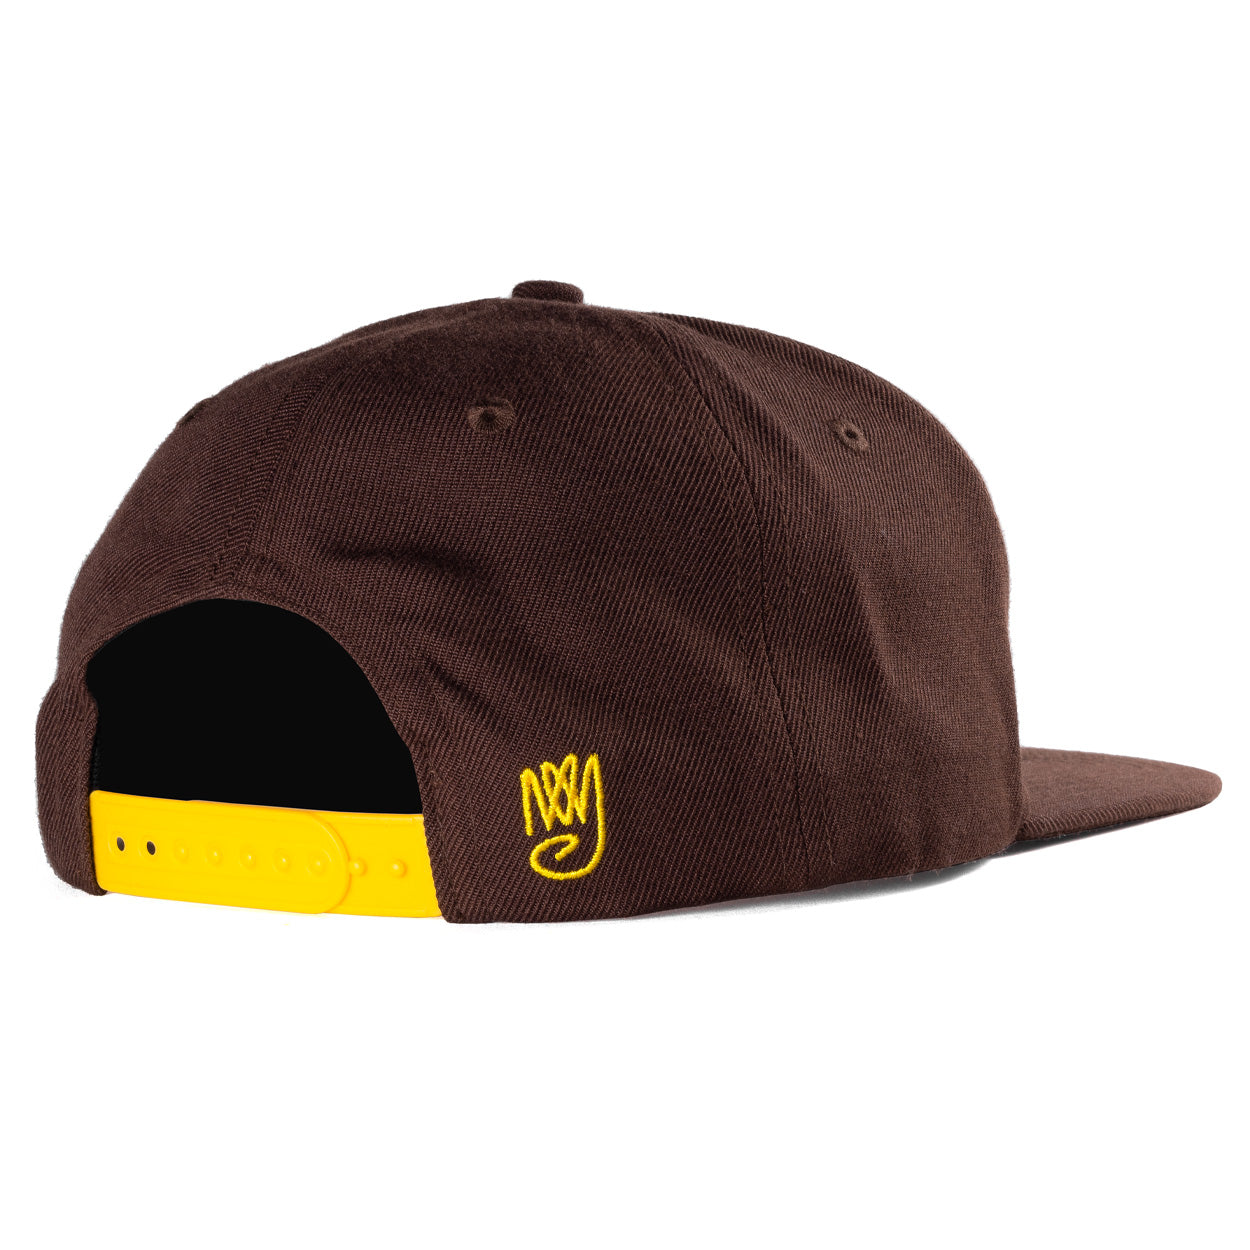 The Old Town Snapback